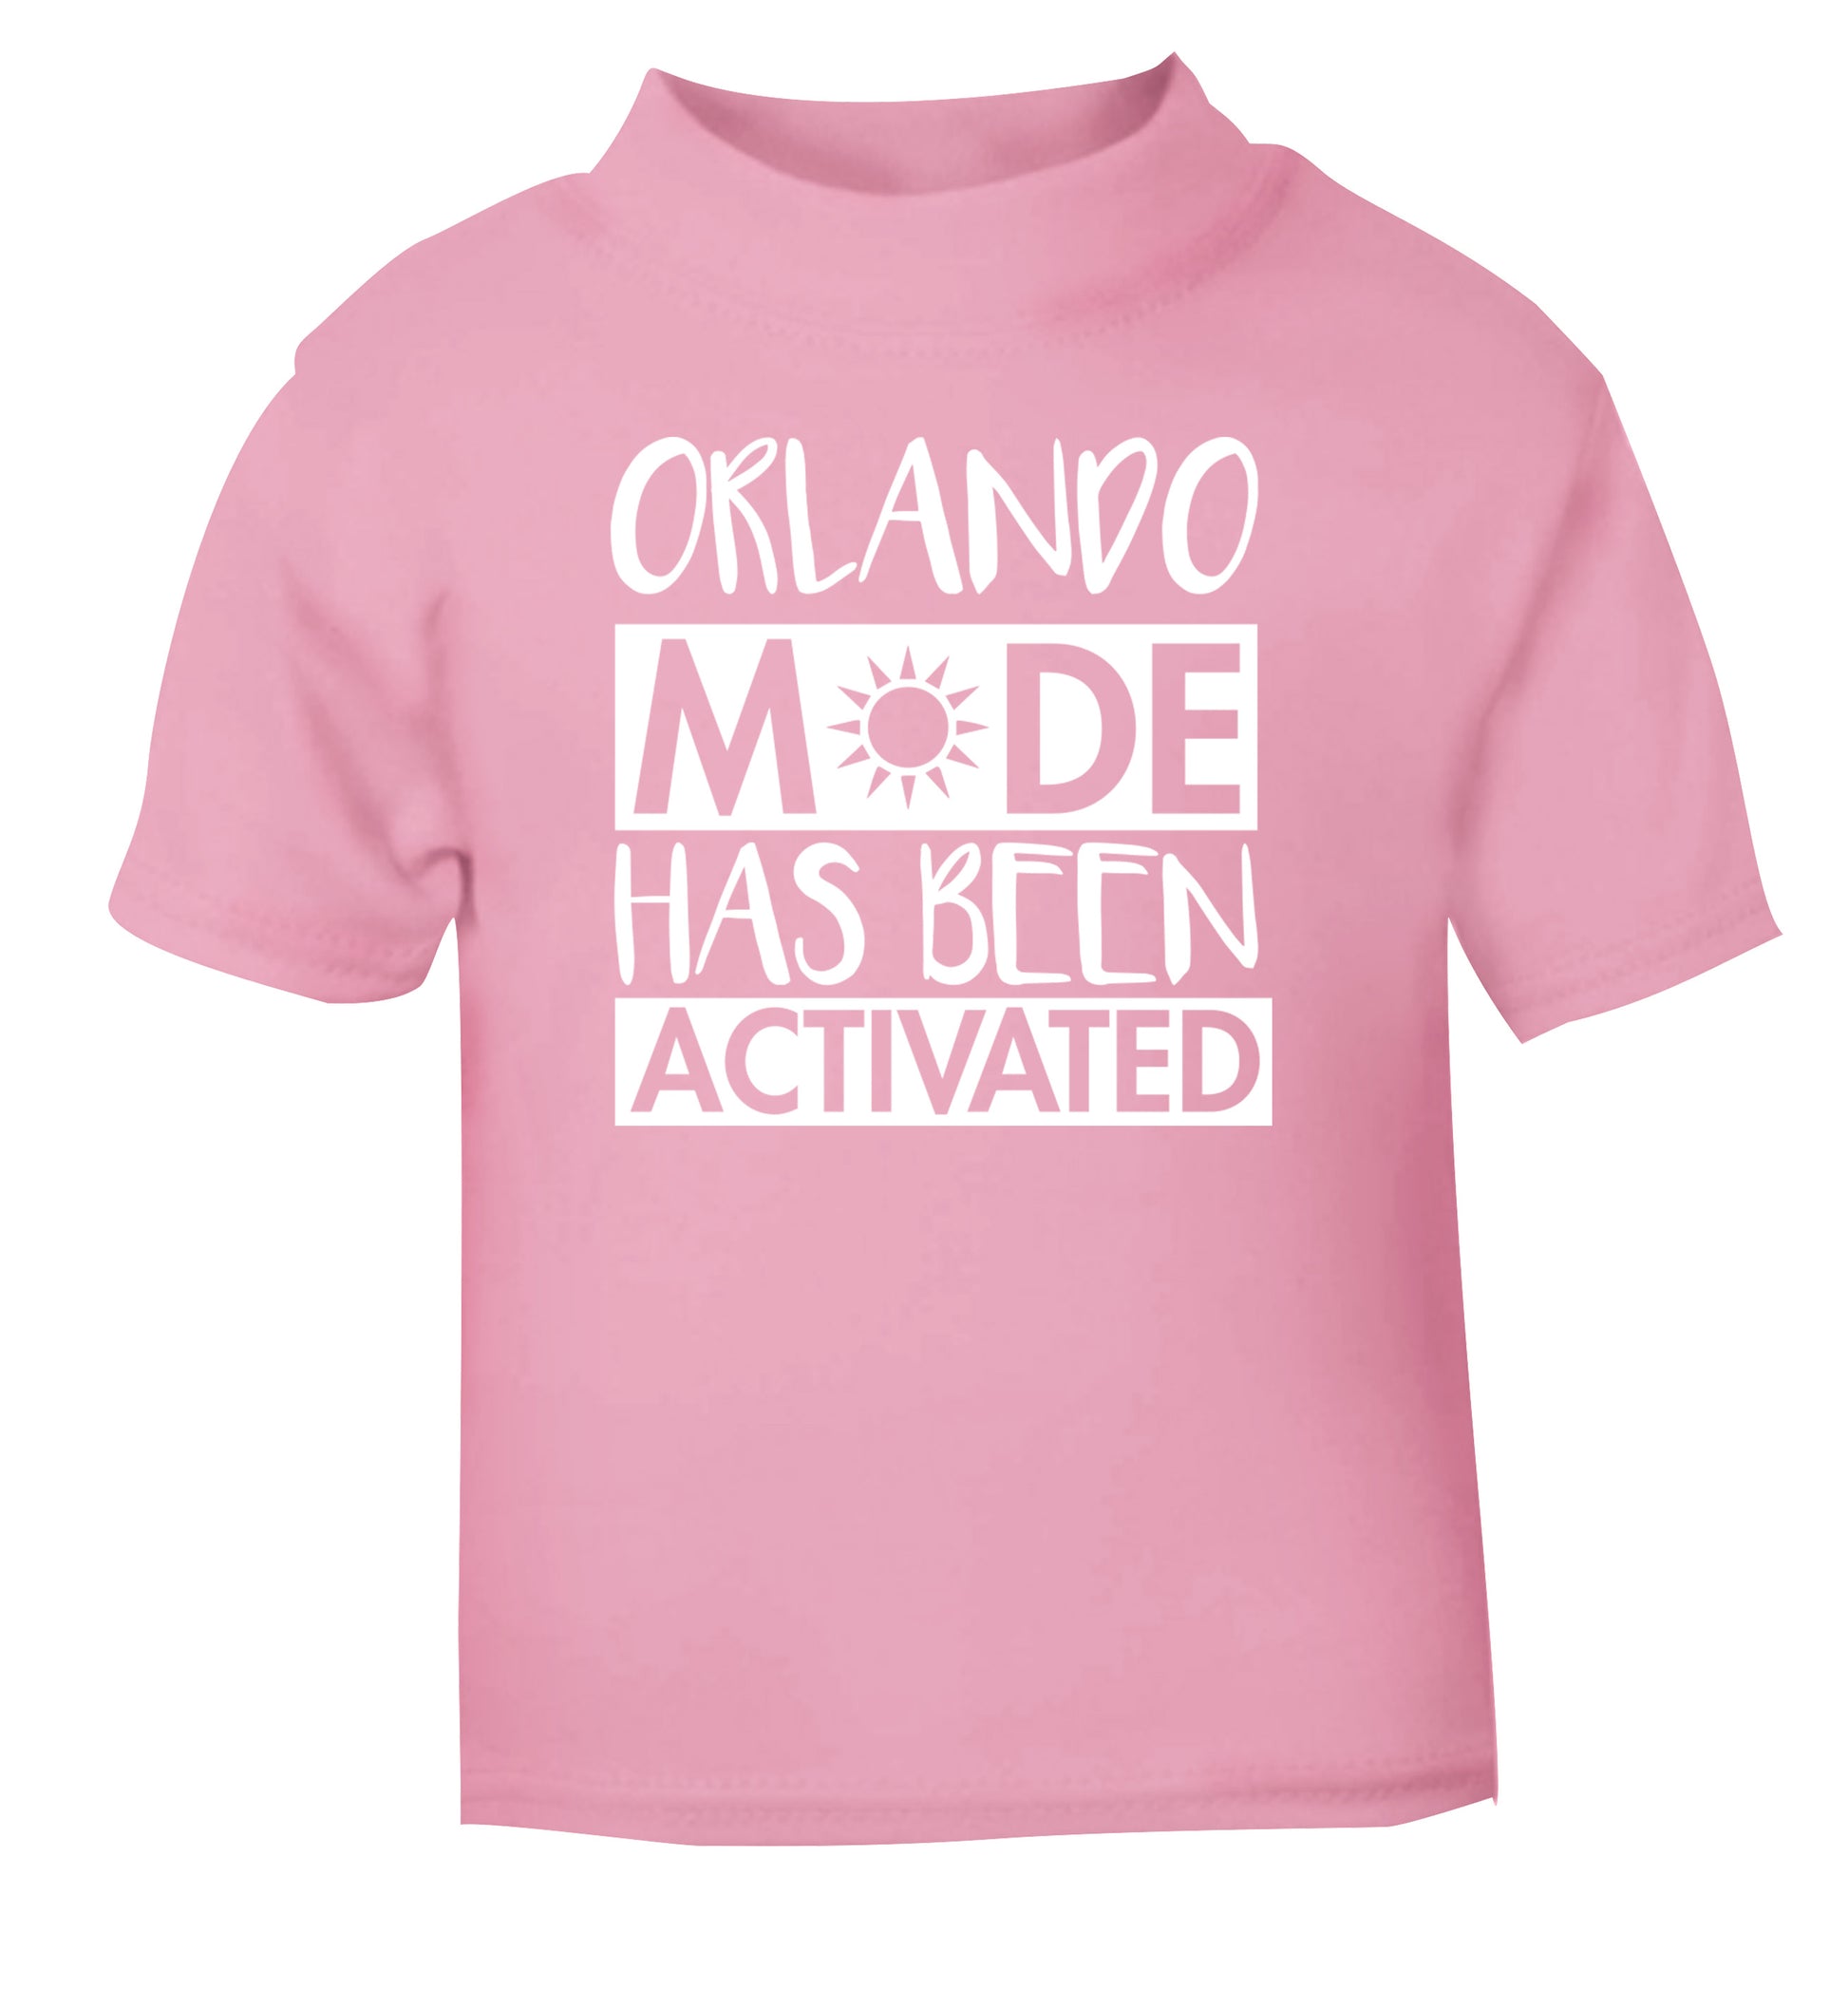 Orlando mode has been activated light pink Baby Toddler Tshirt 2 Years